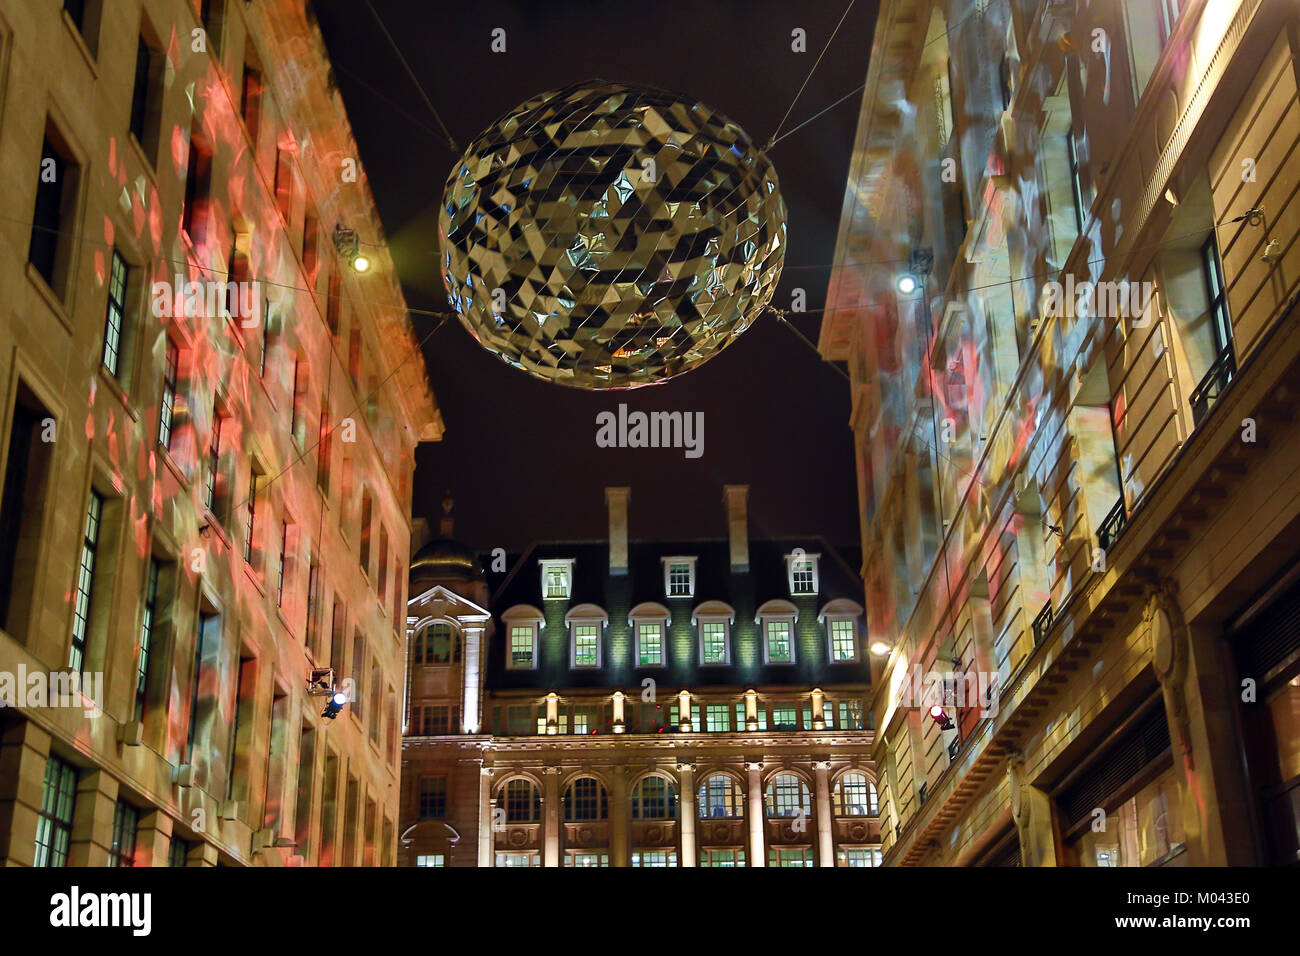 London, UK. 18th Jan, 2018. Reflektor by Studio Roso in St. James Market as part of the Lumiere London Light Festival in London Credit: Paul Brown/Alamy Live News Stock Photo